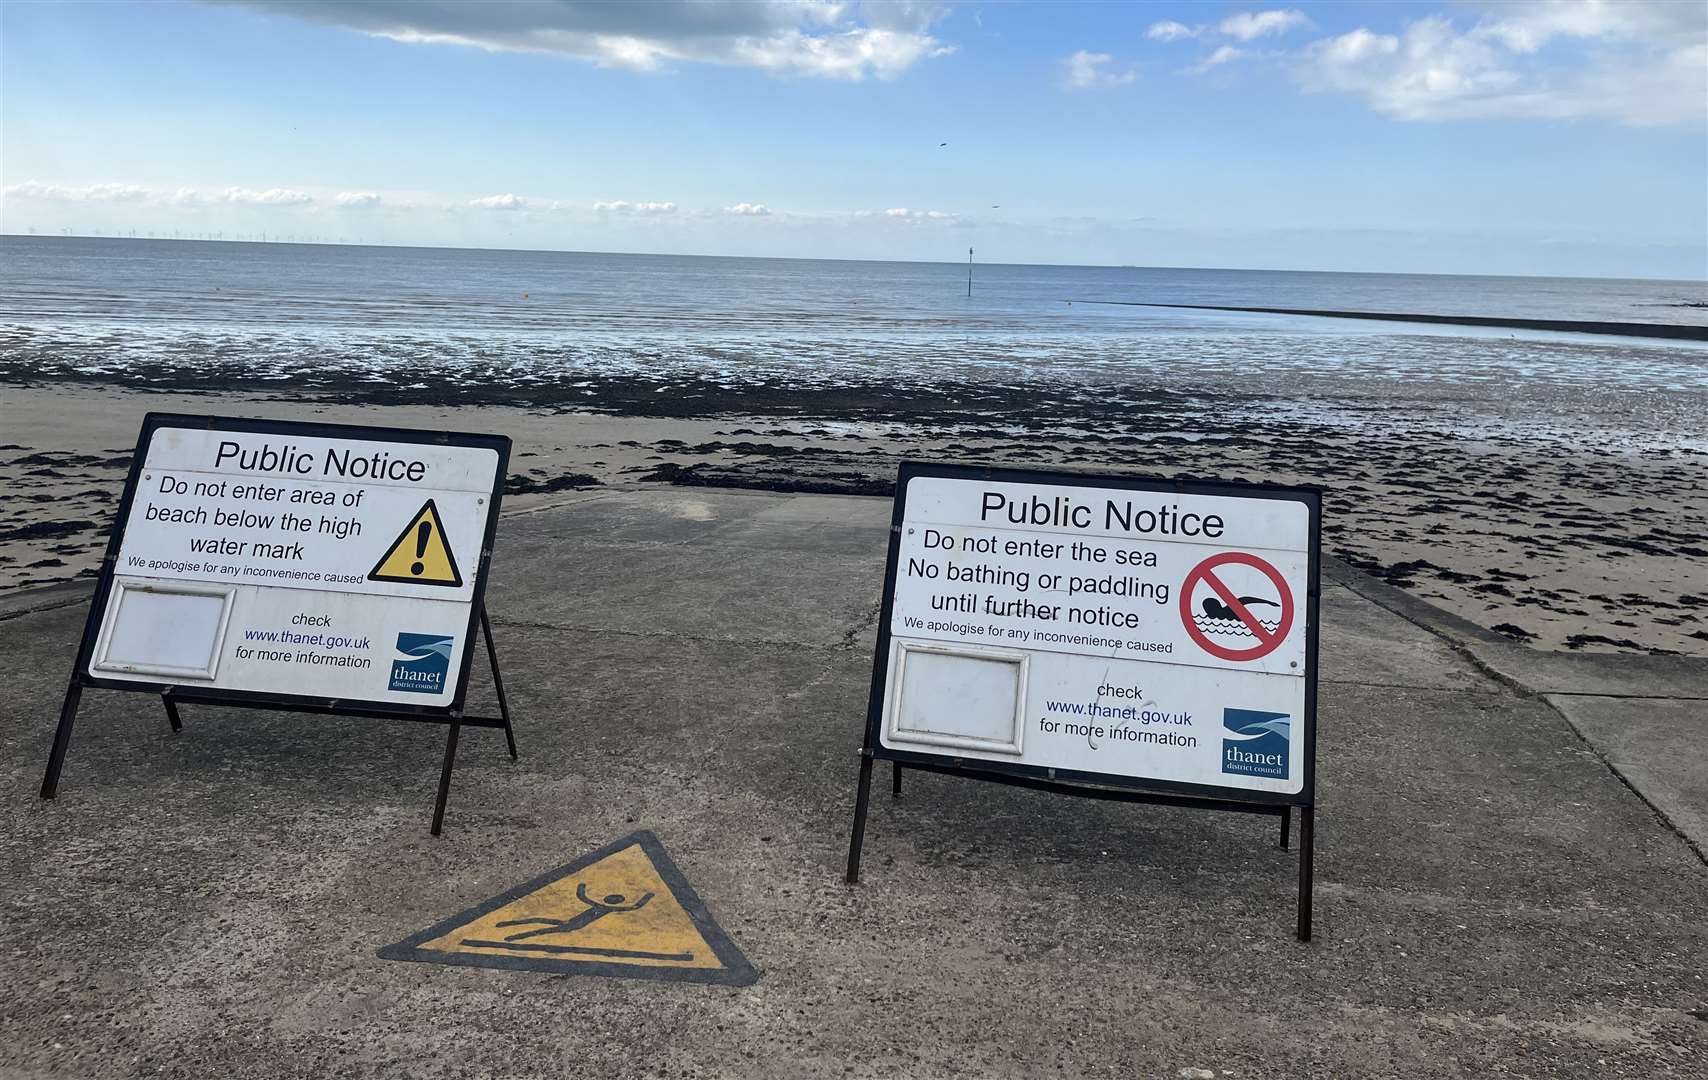 Following pollution fears, signs have returned warning the public against bathing at both Minnis Bay and West Bay in Thanet